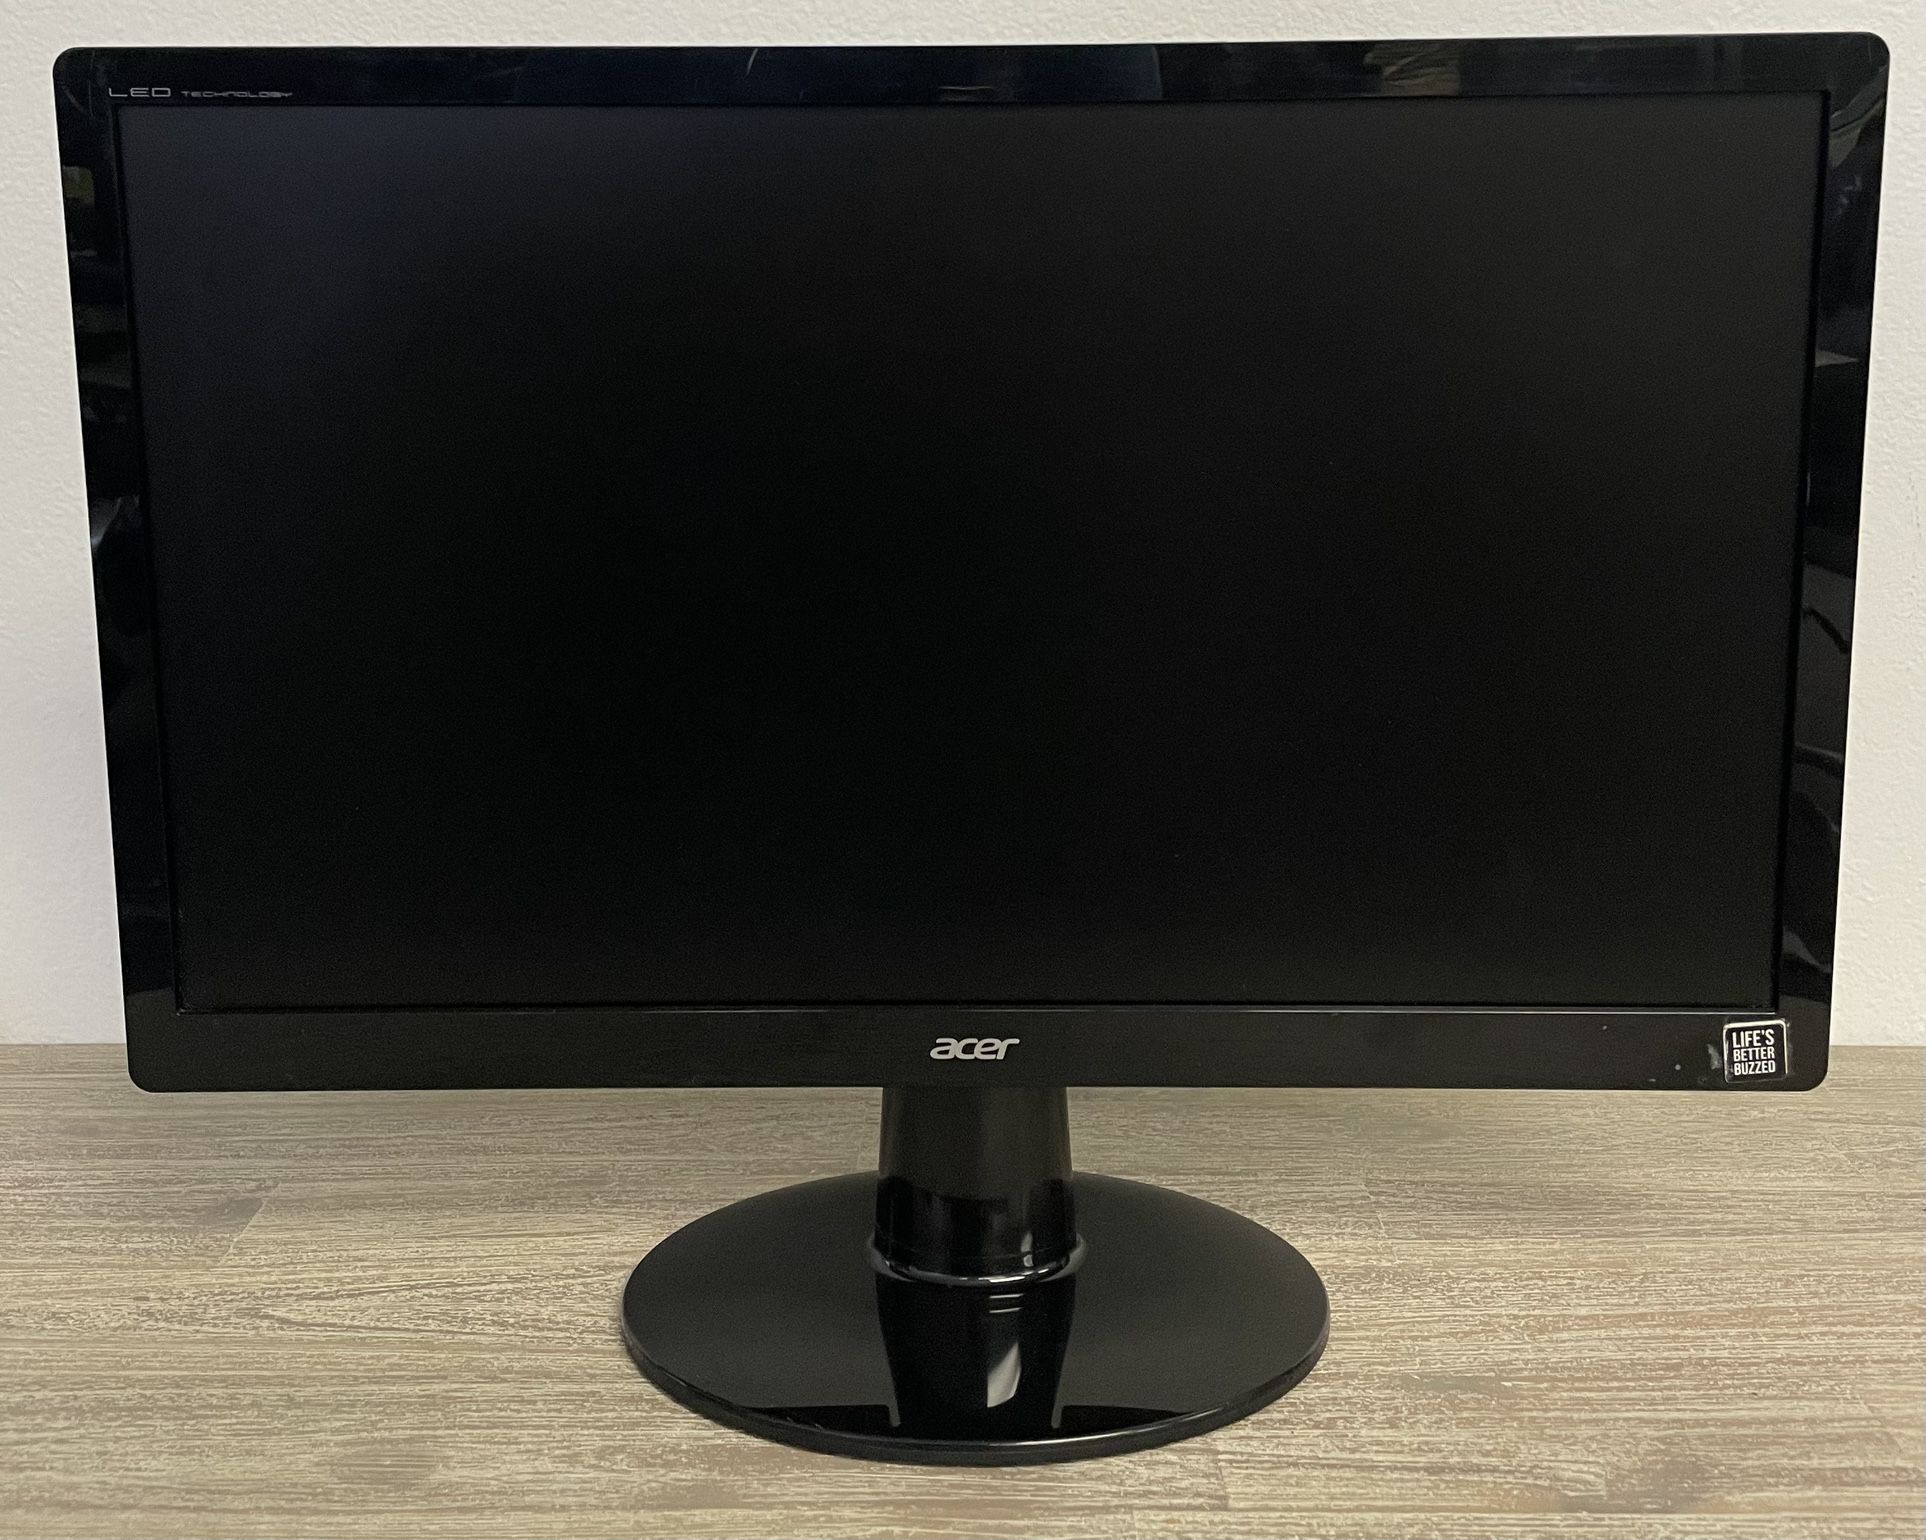 Acer Monitor June 2016. USED